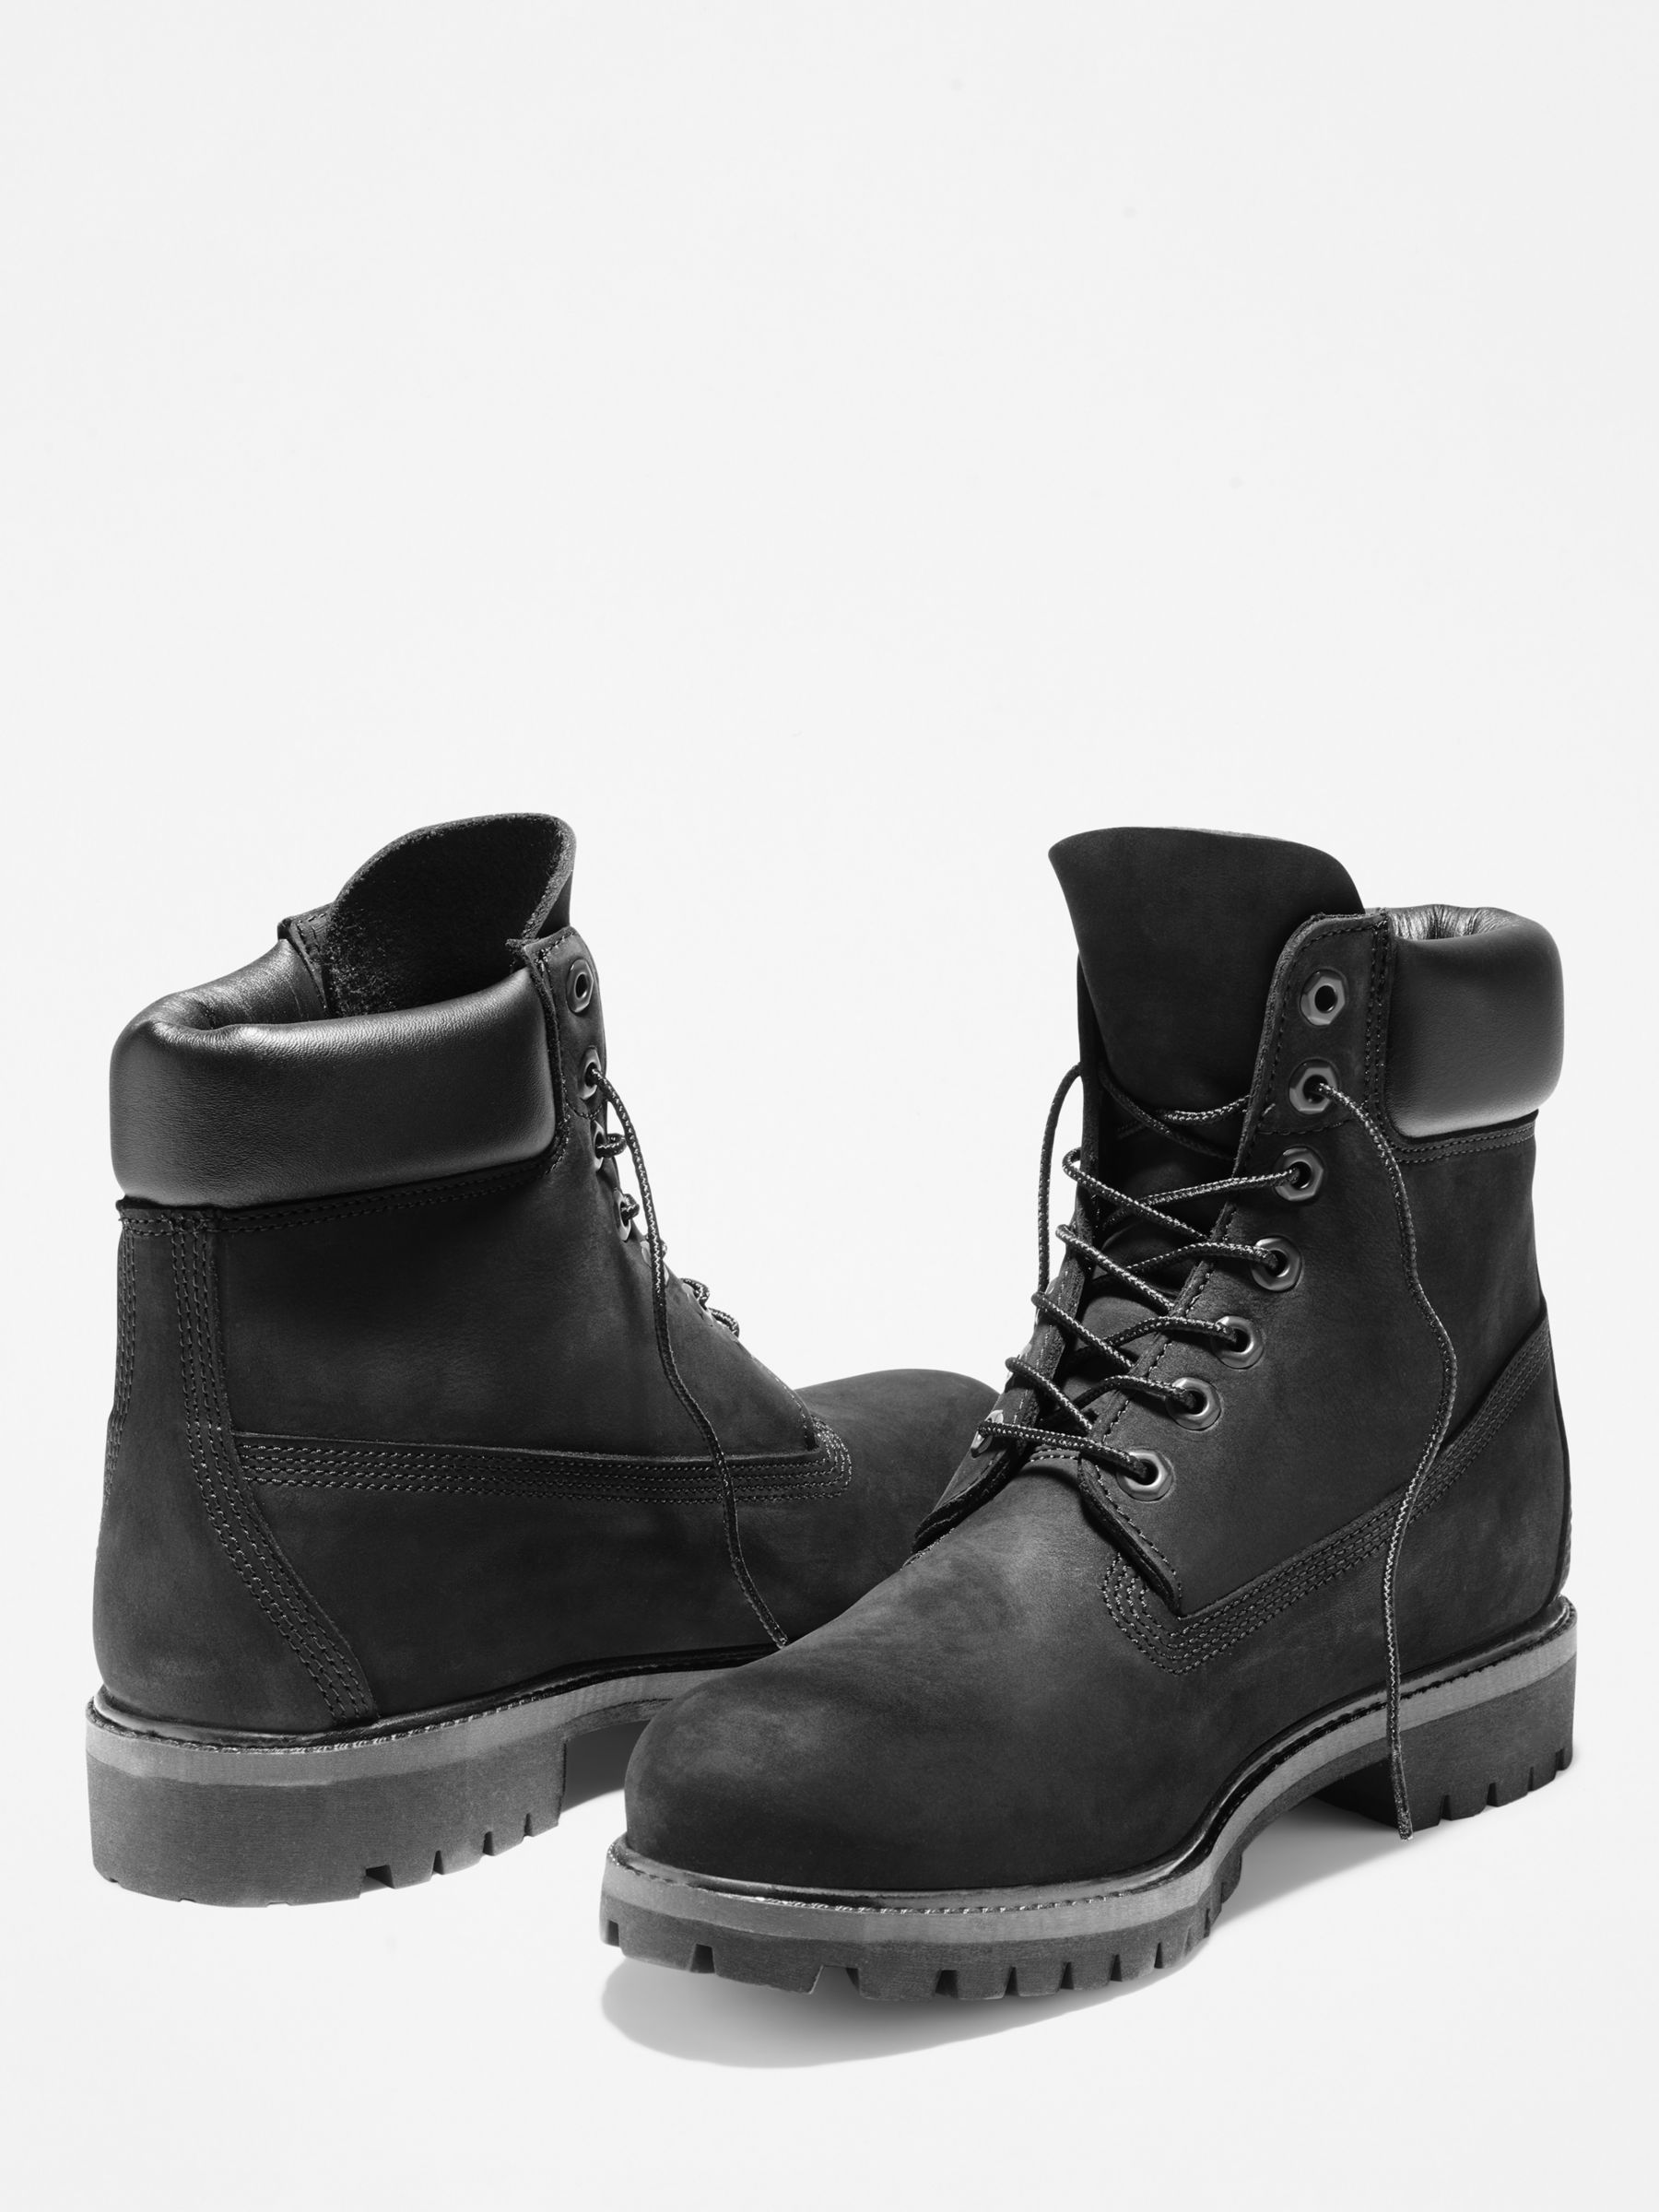 Timberland Wide Fit Classic 6-Inch Premium Boots, Black at John Lewis & Partners